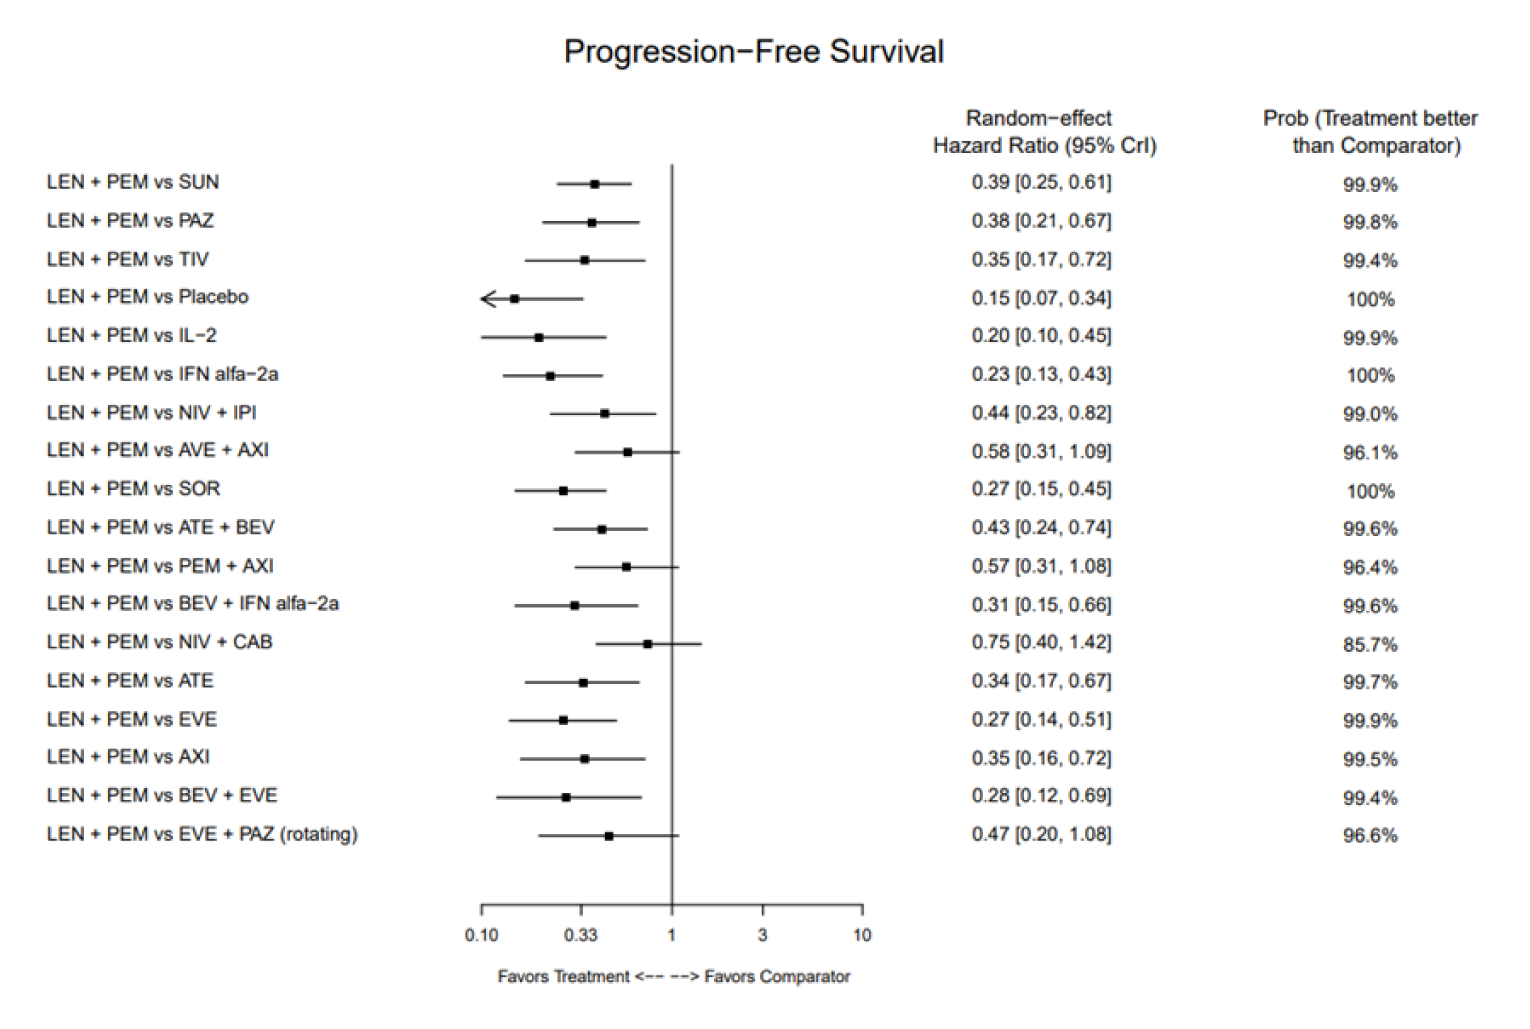 Forest plot of the base-case analysis for progression-free survival (FDA censoring).